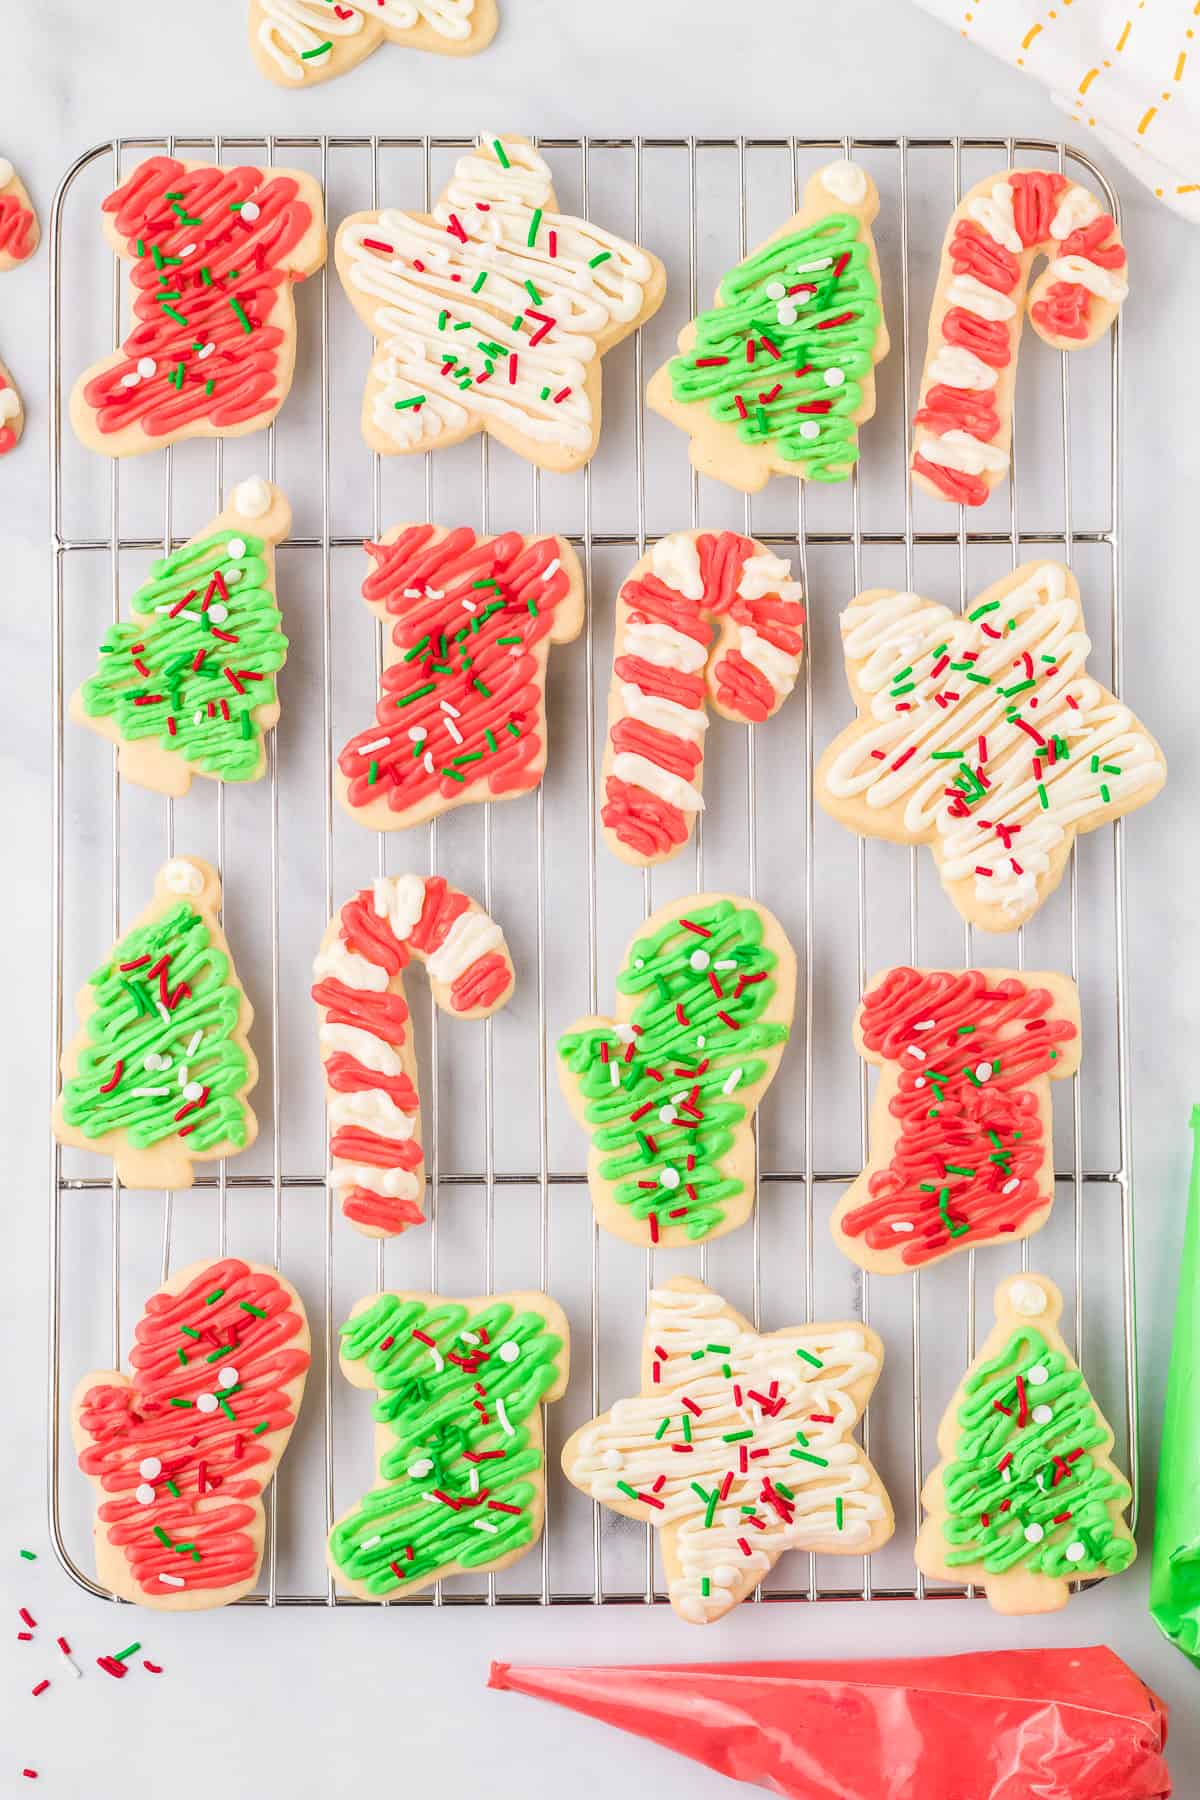 Sugar cookies frosted in red, white and green frosting on a wire cooling rack from overhead on a counter.